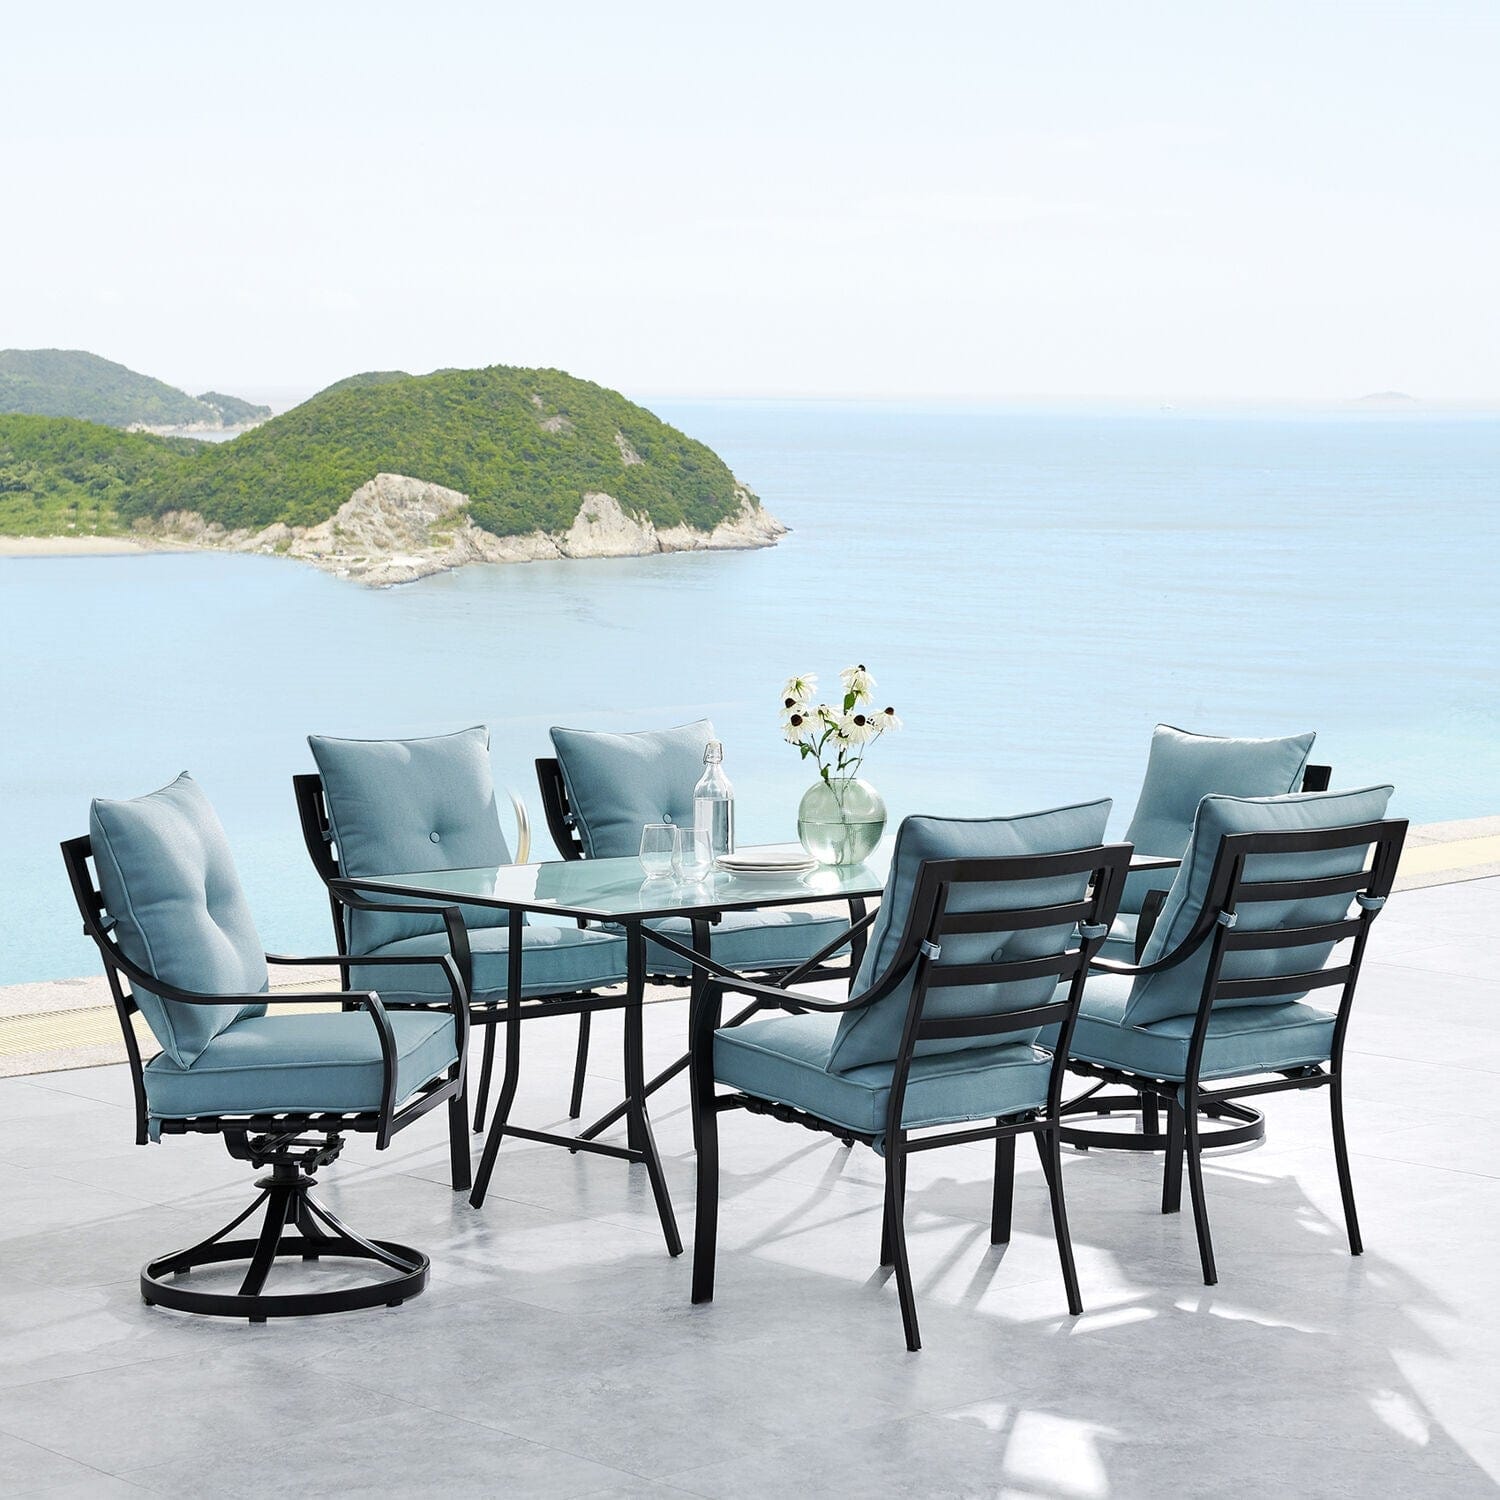 Hanover Outdoor Dining Set Hanover Lavallette 7-Piece Dining Set in Ocean Blue with 4 Chairs, 2 Swivel Rockers, and a 66" x 38" Glass-Top Table - LAVDN7PCSW2-BLU